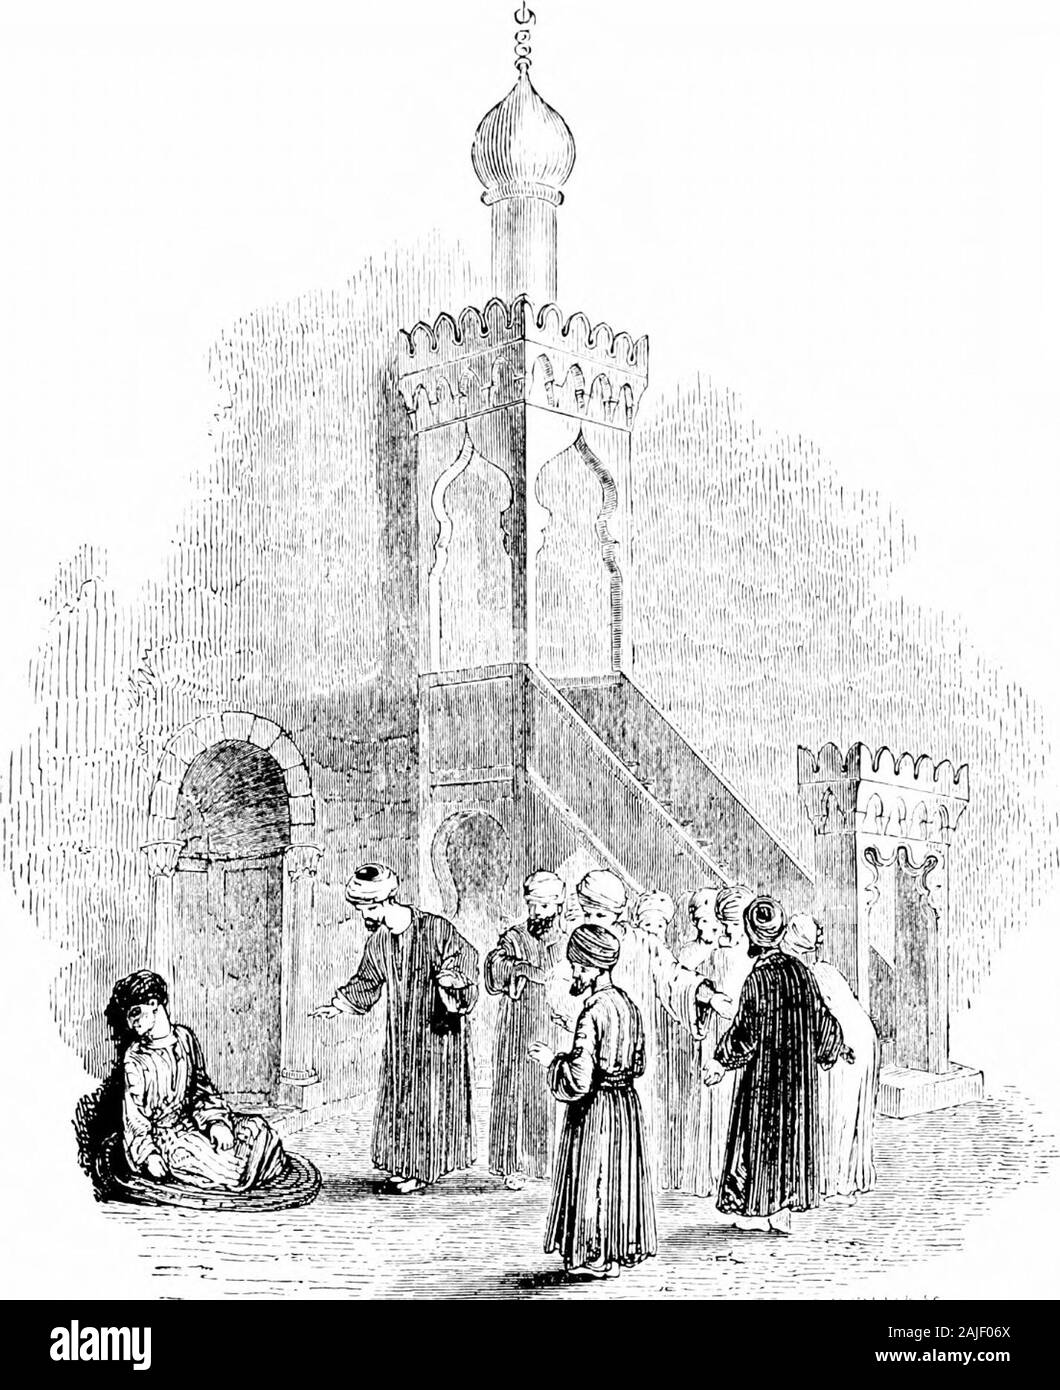 The thousand and one nights (Volume 1): commonly called, in England, the Arabian nights' entertainments . he son of Eiyoob.And they came to the house, and found that the mother of Ghanim,and his sister, had made for them a tomb, and sat by it weeping; andthey laid hold upon them, and plundered the house, and the motherand sister knew not the cause: and when they brought them beforethe Sultan,25 he inquired of them respecting Ghanim the son of Eiyoob;and they answered him, For the space of a year we have obtained notidings of him.—And they restored them to their place.26 In the mean time, Ghani Stock Photo